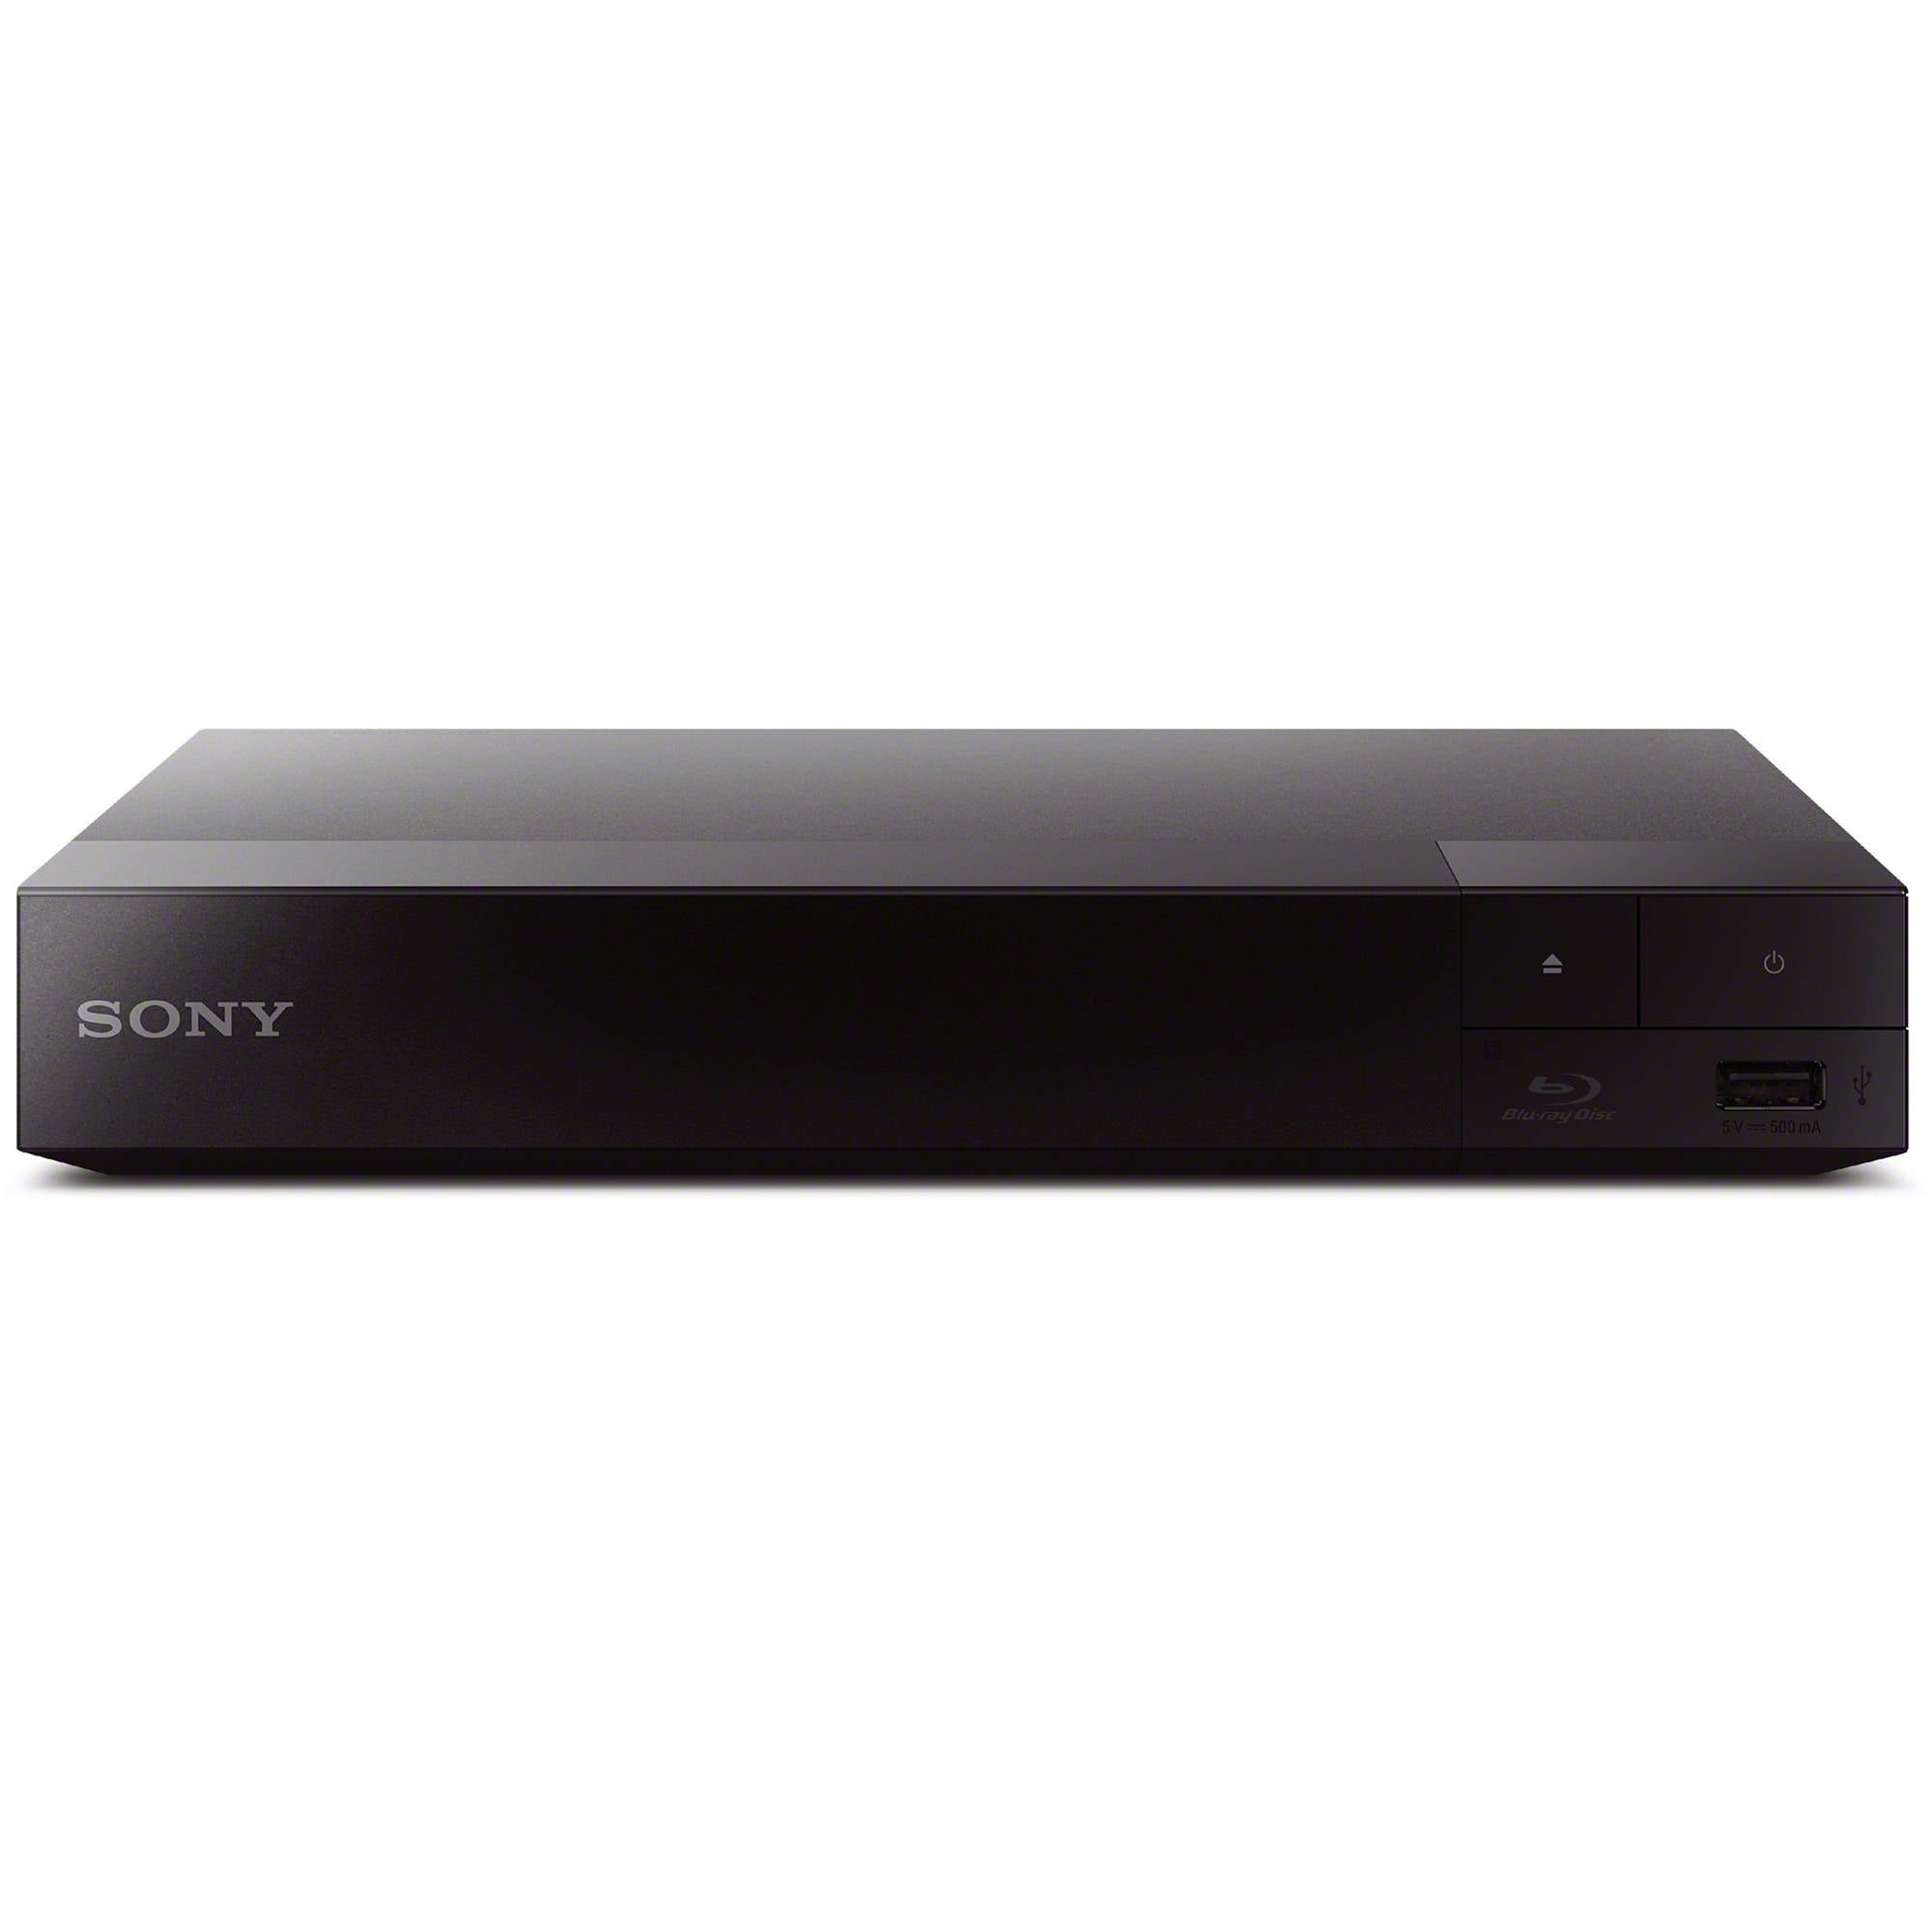 Inspireren Wees Opera Sony Streaming Blu-ray Disc Player with Built-in Wi-Fi - BDP-S3700 -  Walmart.com